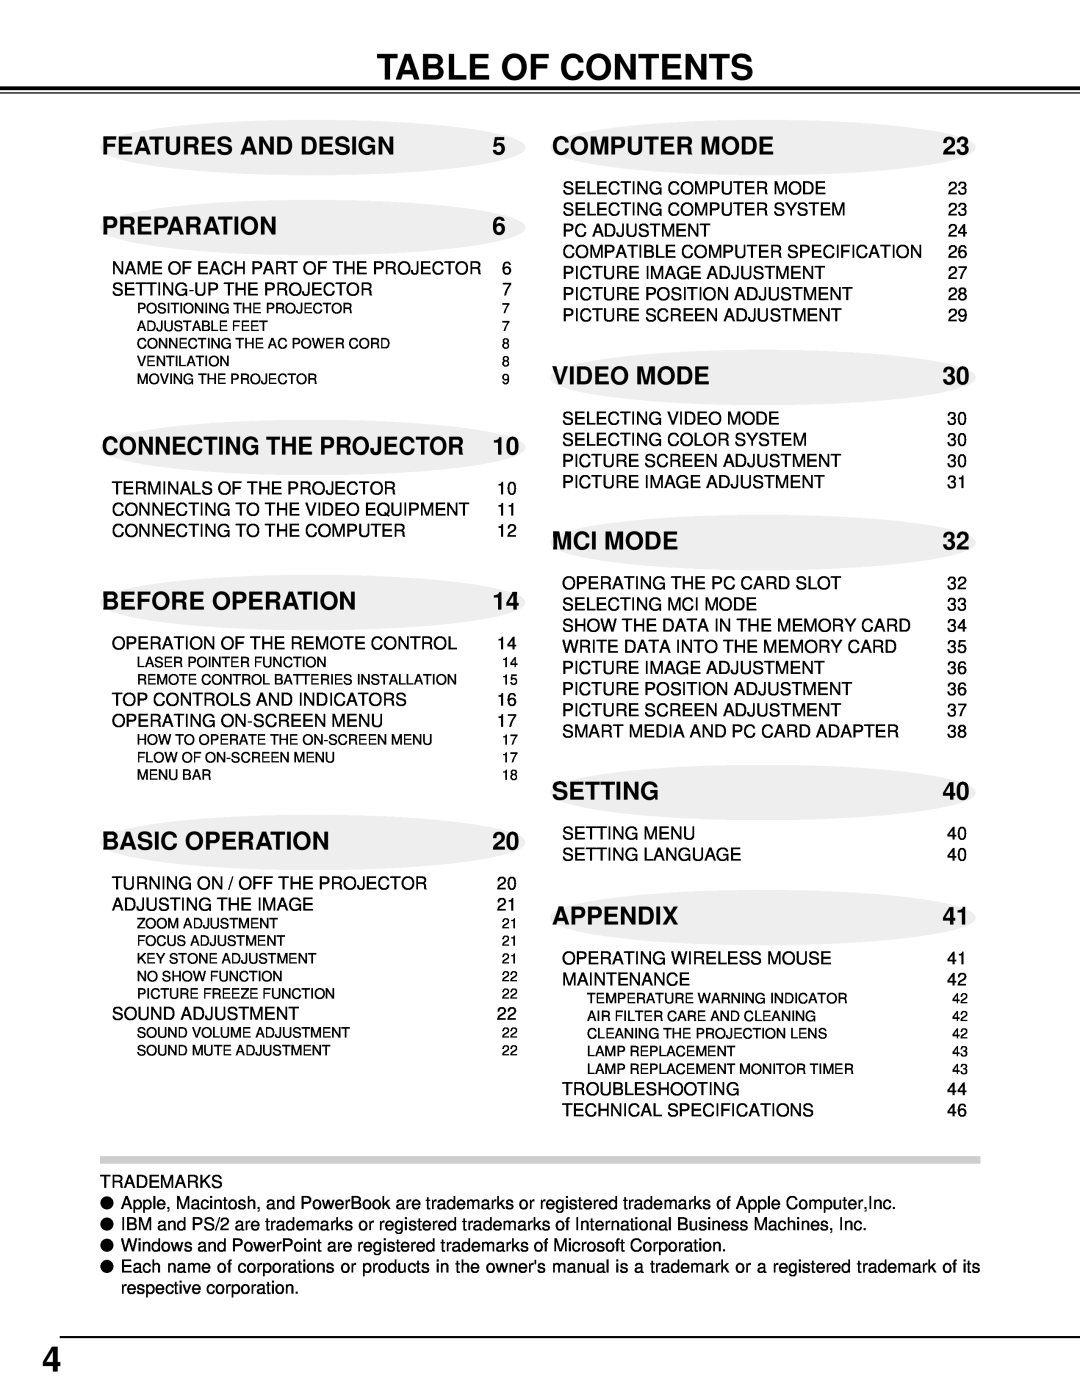 BOXLIGHT CP-33t Table Of Contents, Features And Design, Computer Mode, Preparation, Before Operation, Basic Operation 